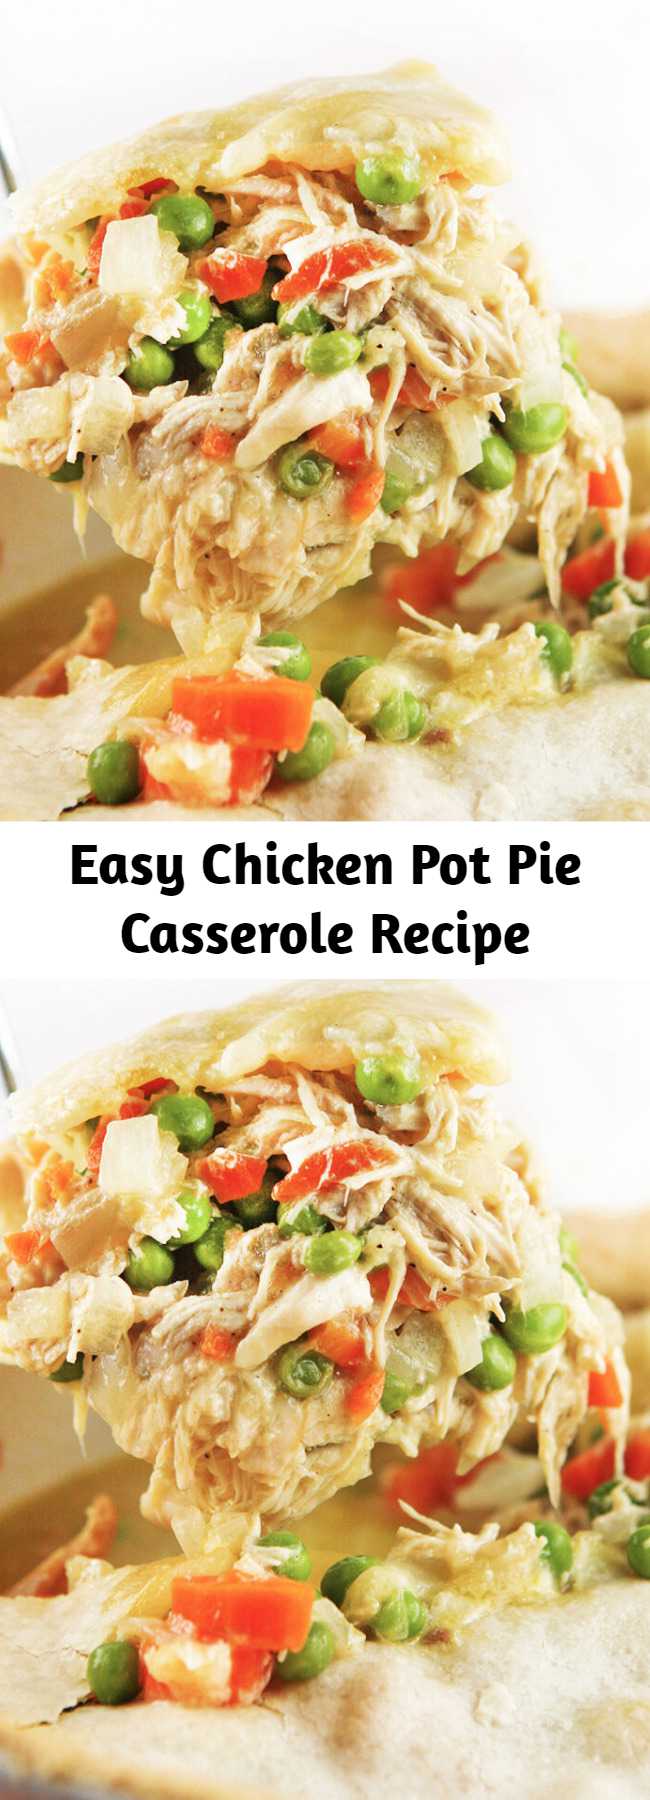 Easy Chicken Pot Pie Casserole Recipe - Chicken Pot Pie Casserole is a super easy and delicious dinner that comes together quickly. It will quickly become a family favorite!